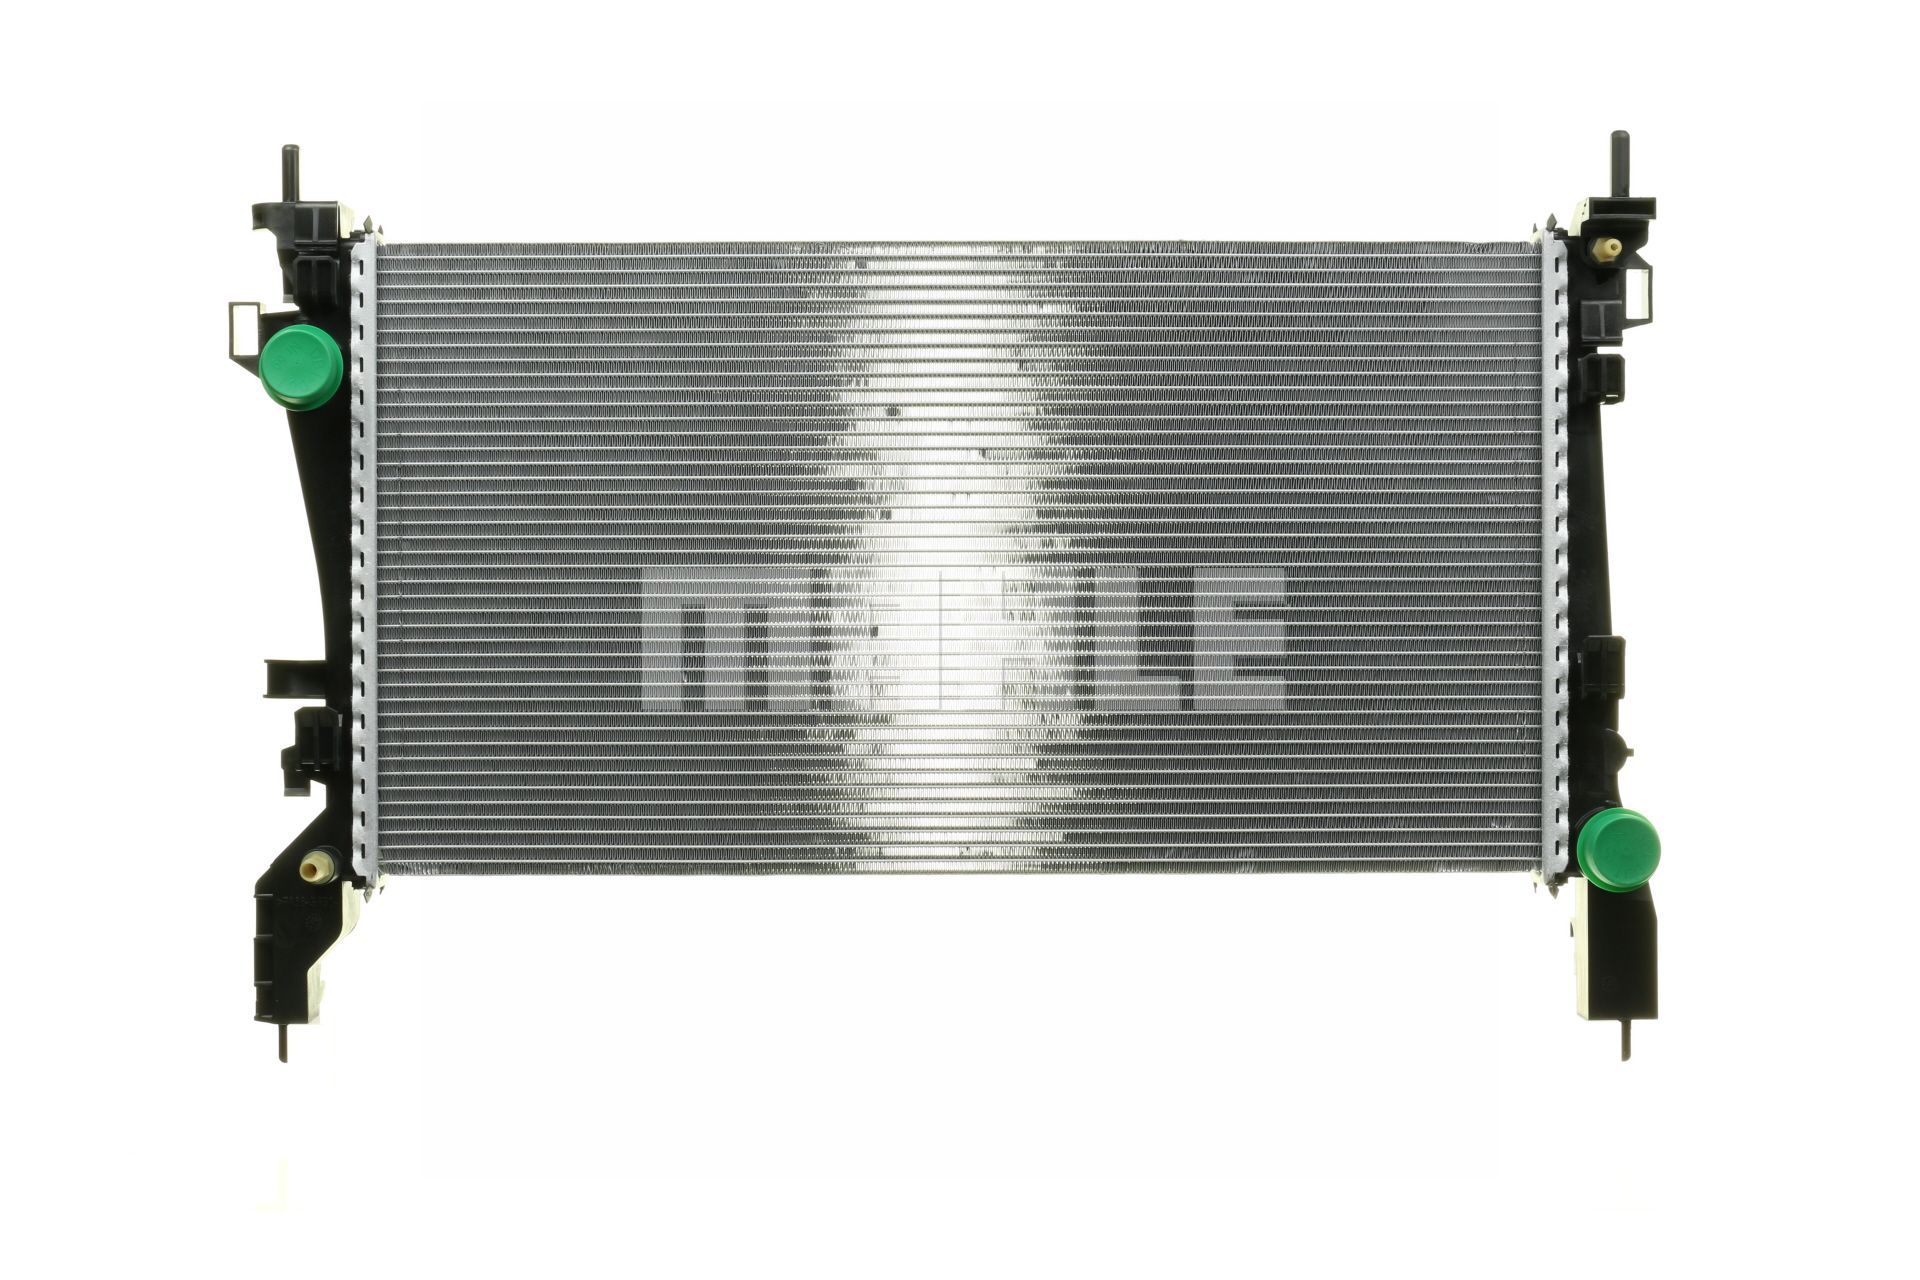 MAHLE ORIGINAL CR 1131 000P Engine radiator for vehicles with air conditioning, 630 x 342 x 26 mm, Manual Transmission, Brazed cooling fins